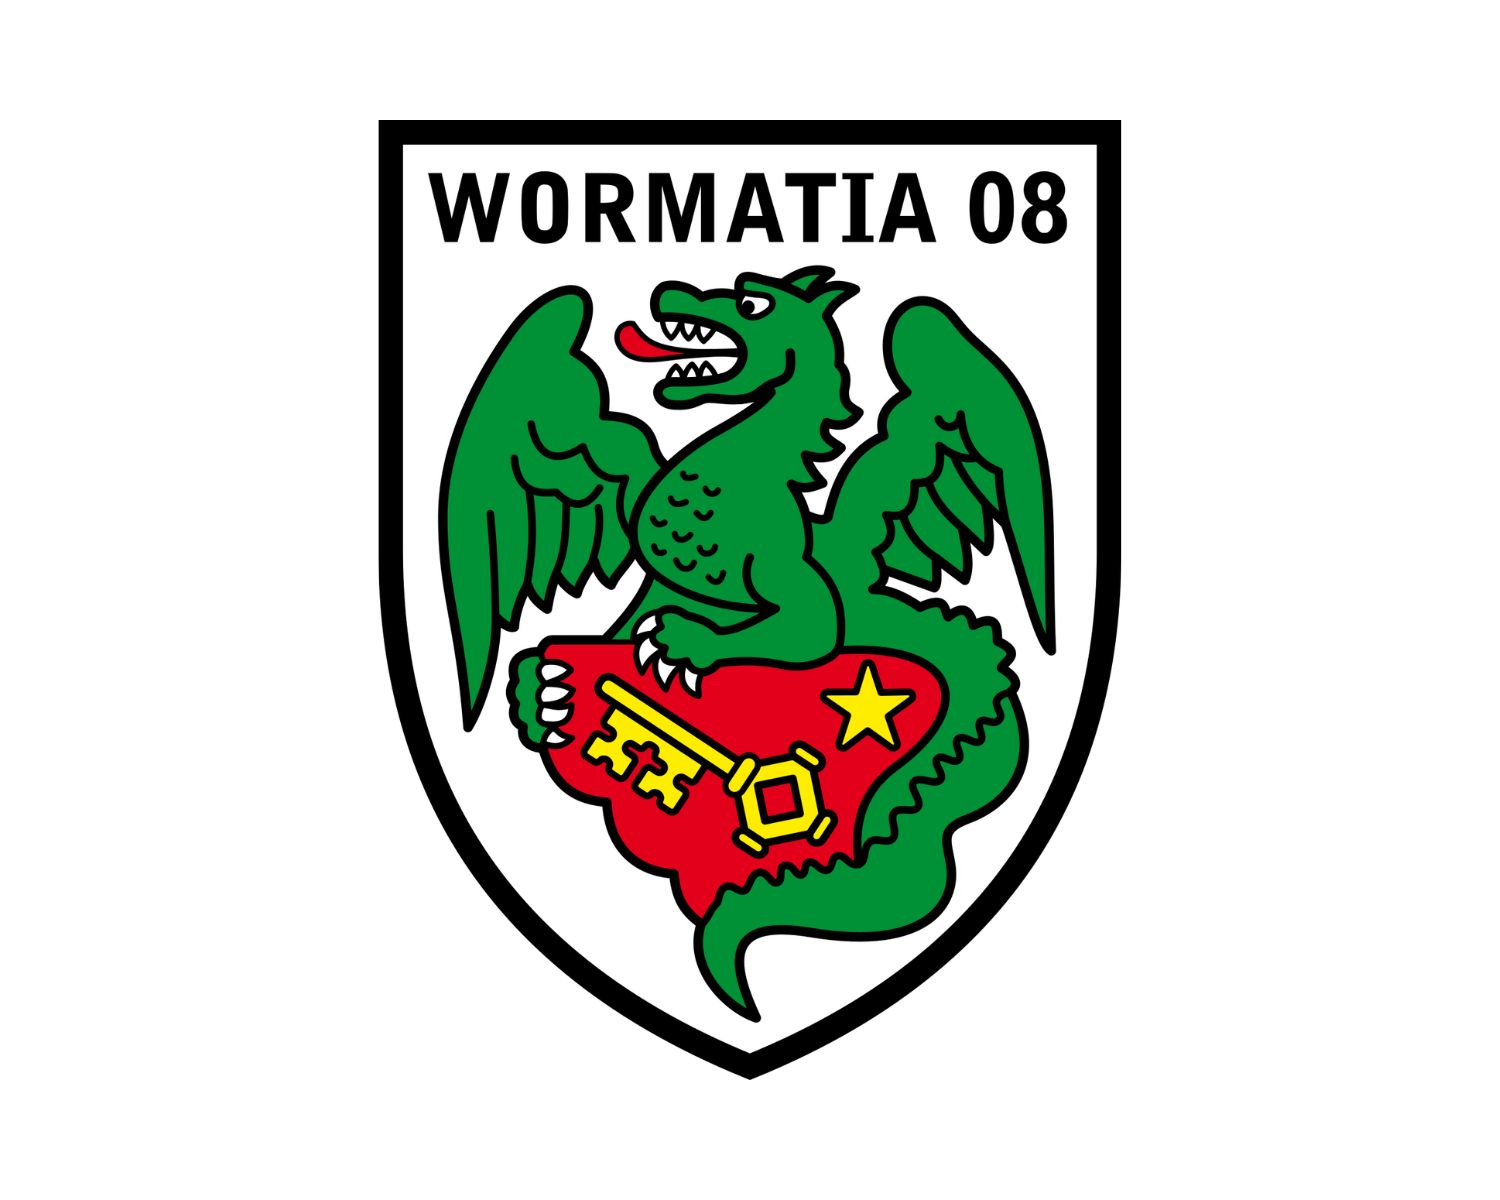 wormatia-worms-18-football-club-facts